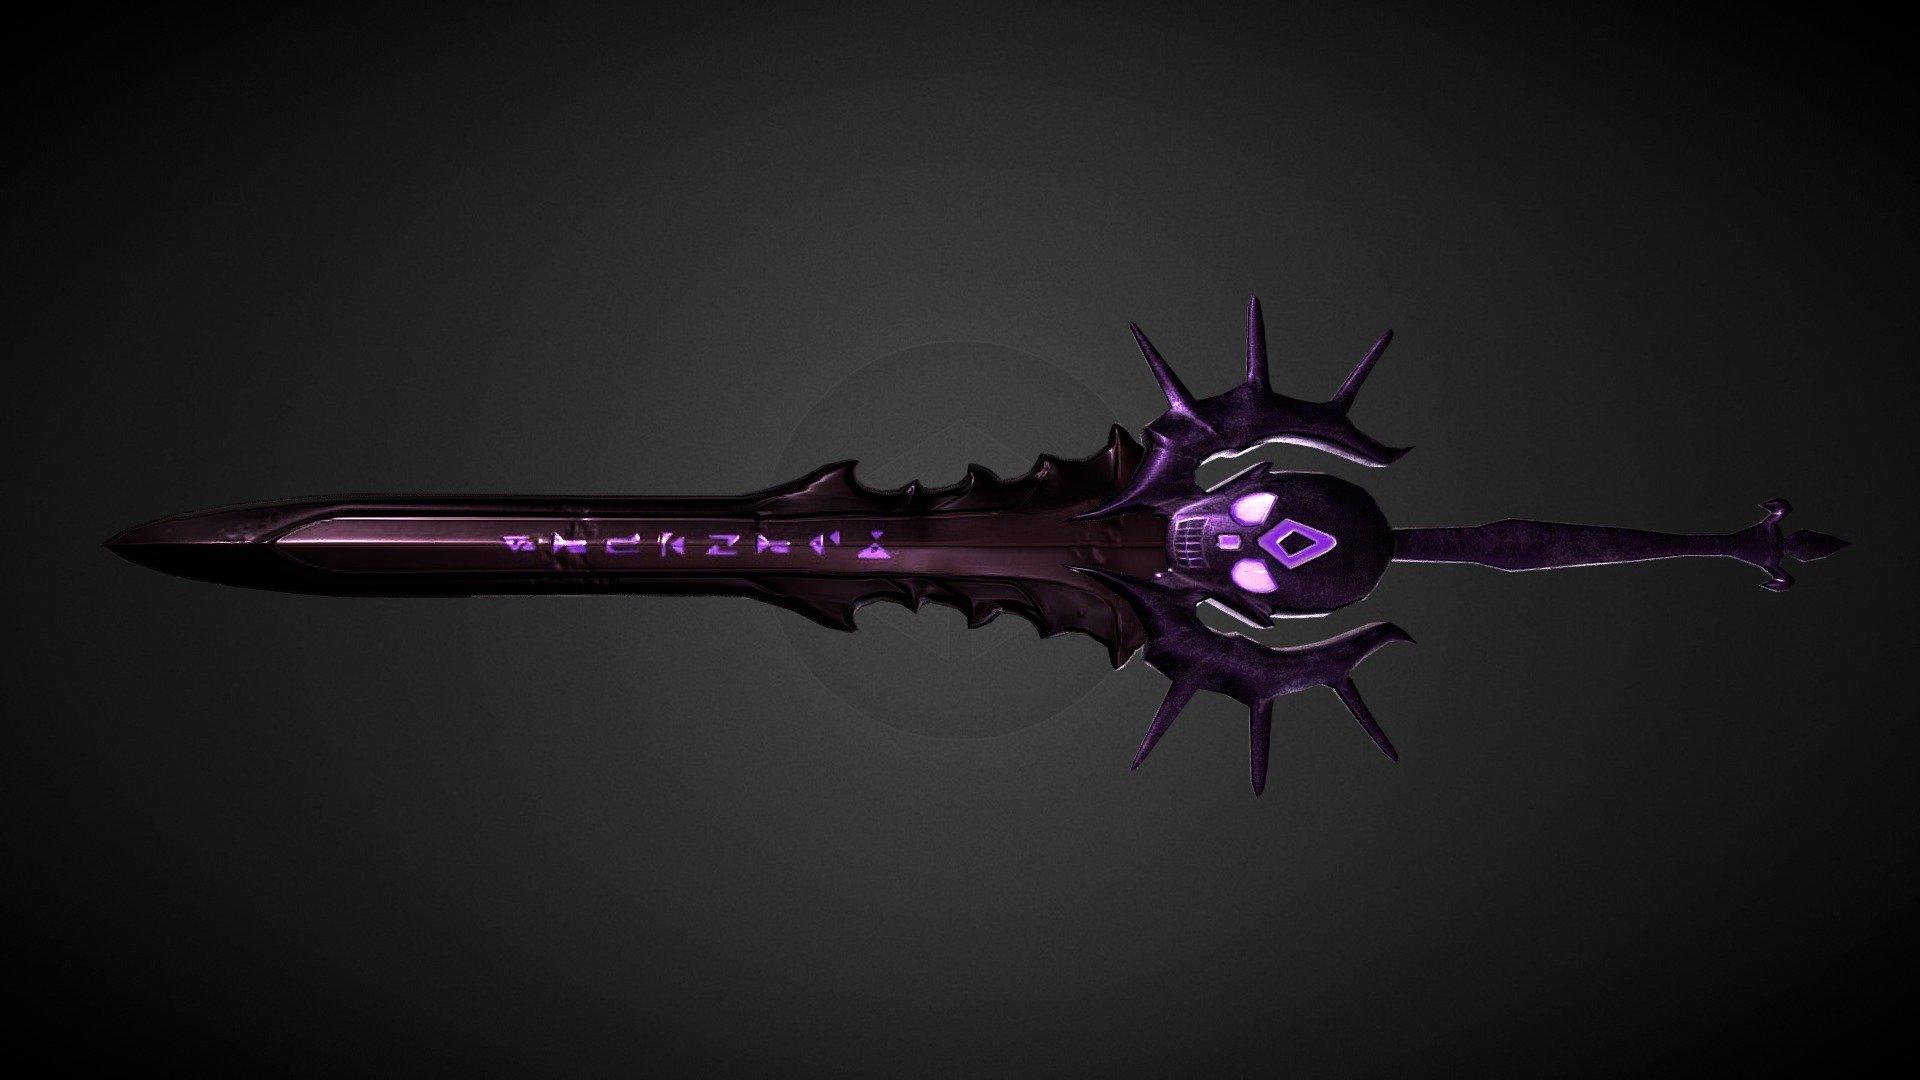 Sister sword to the Holy sword. Started my process with this sword. Made for the mod listed below

https://steamcommunity.com/sharedfiles/filedetails/?id=1090809604&amp;searchtext=pyria - Eclipse Sword - 3D model by rsboros 3d model